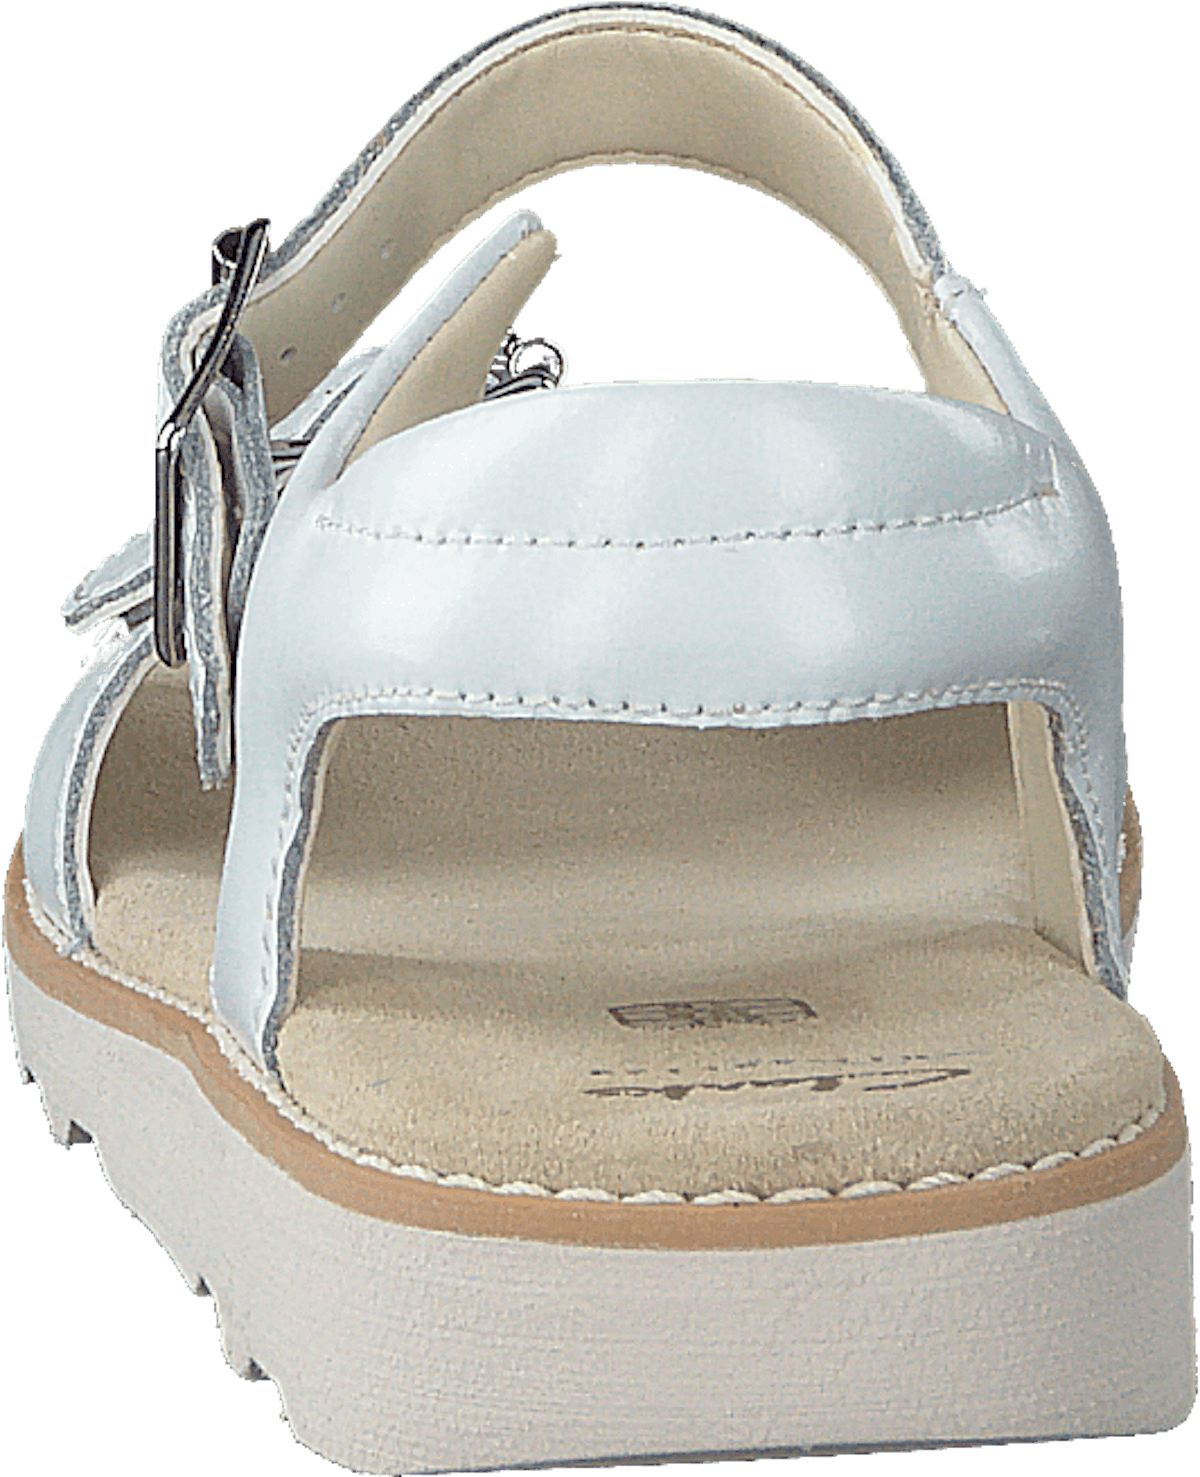 Crown Bloom K White Leather